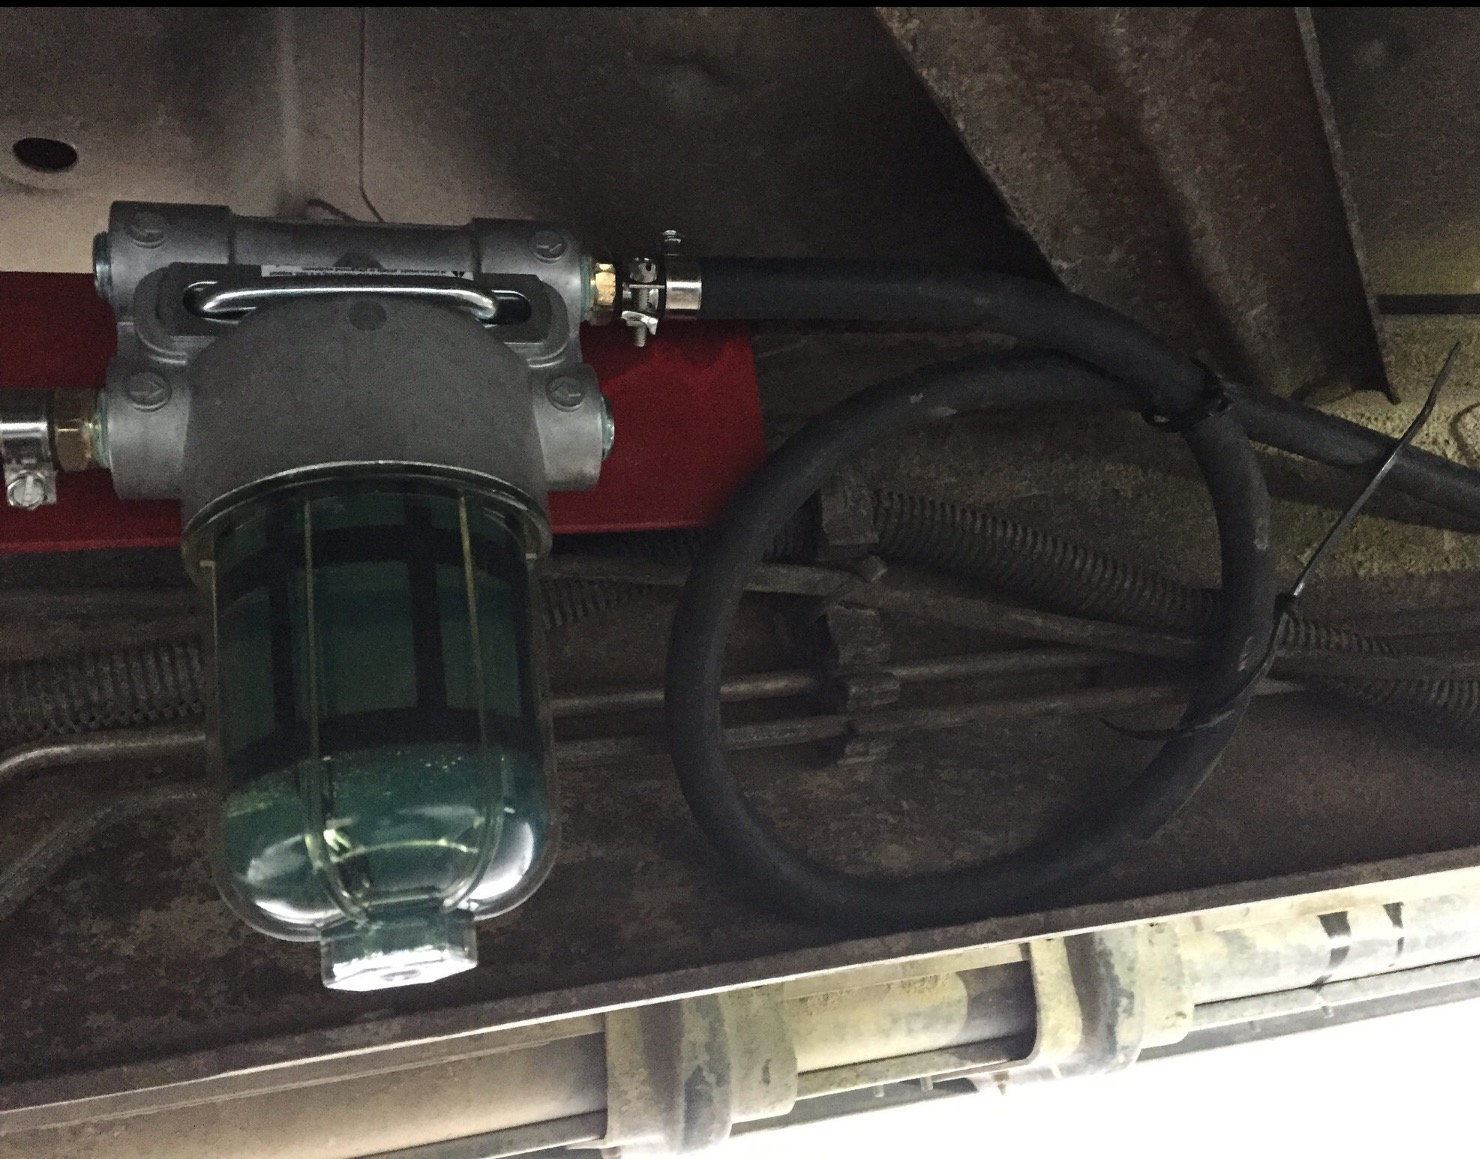 Cut hole in box to access fuel pump - Ford Truck Enthusiasts Forums Where To Cut Hole In Truck Bed For Fuel Pump